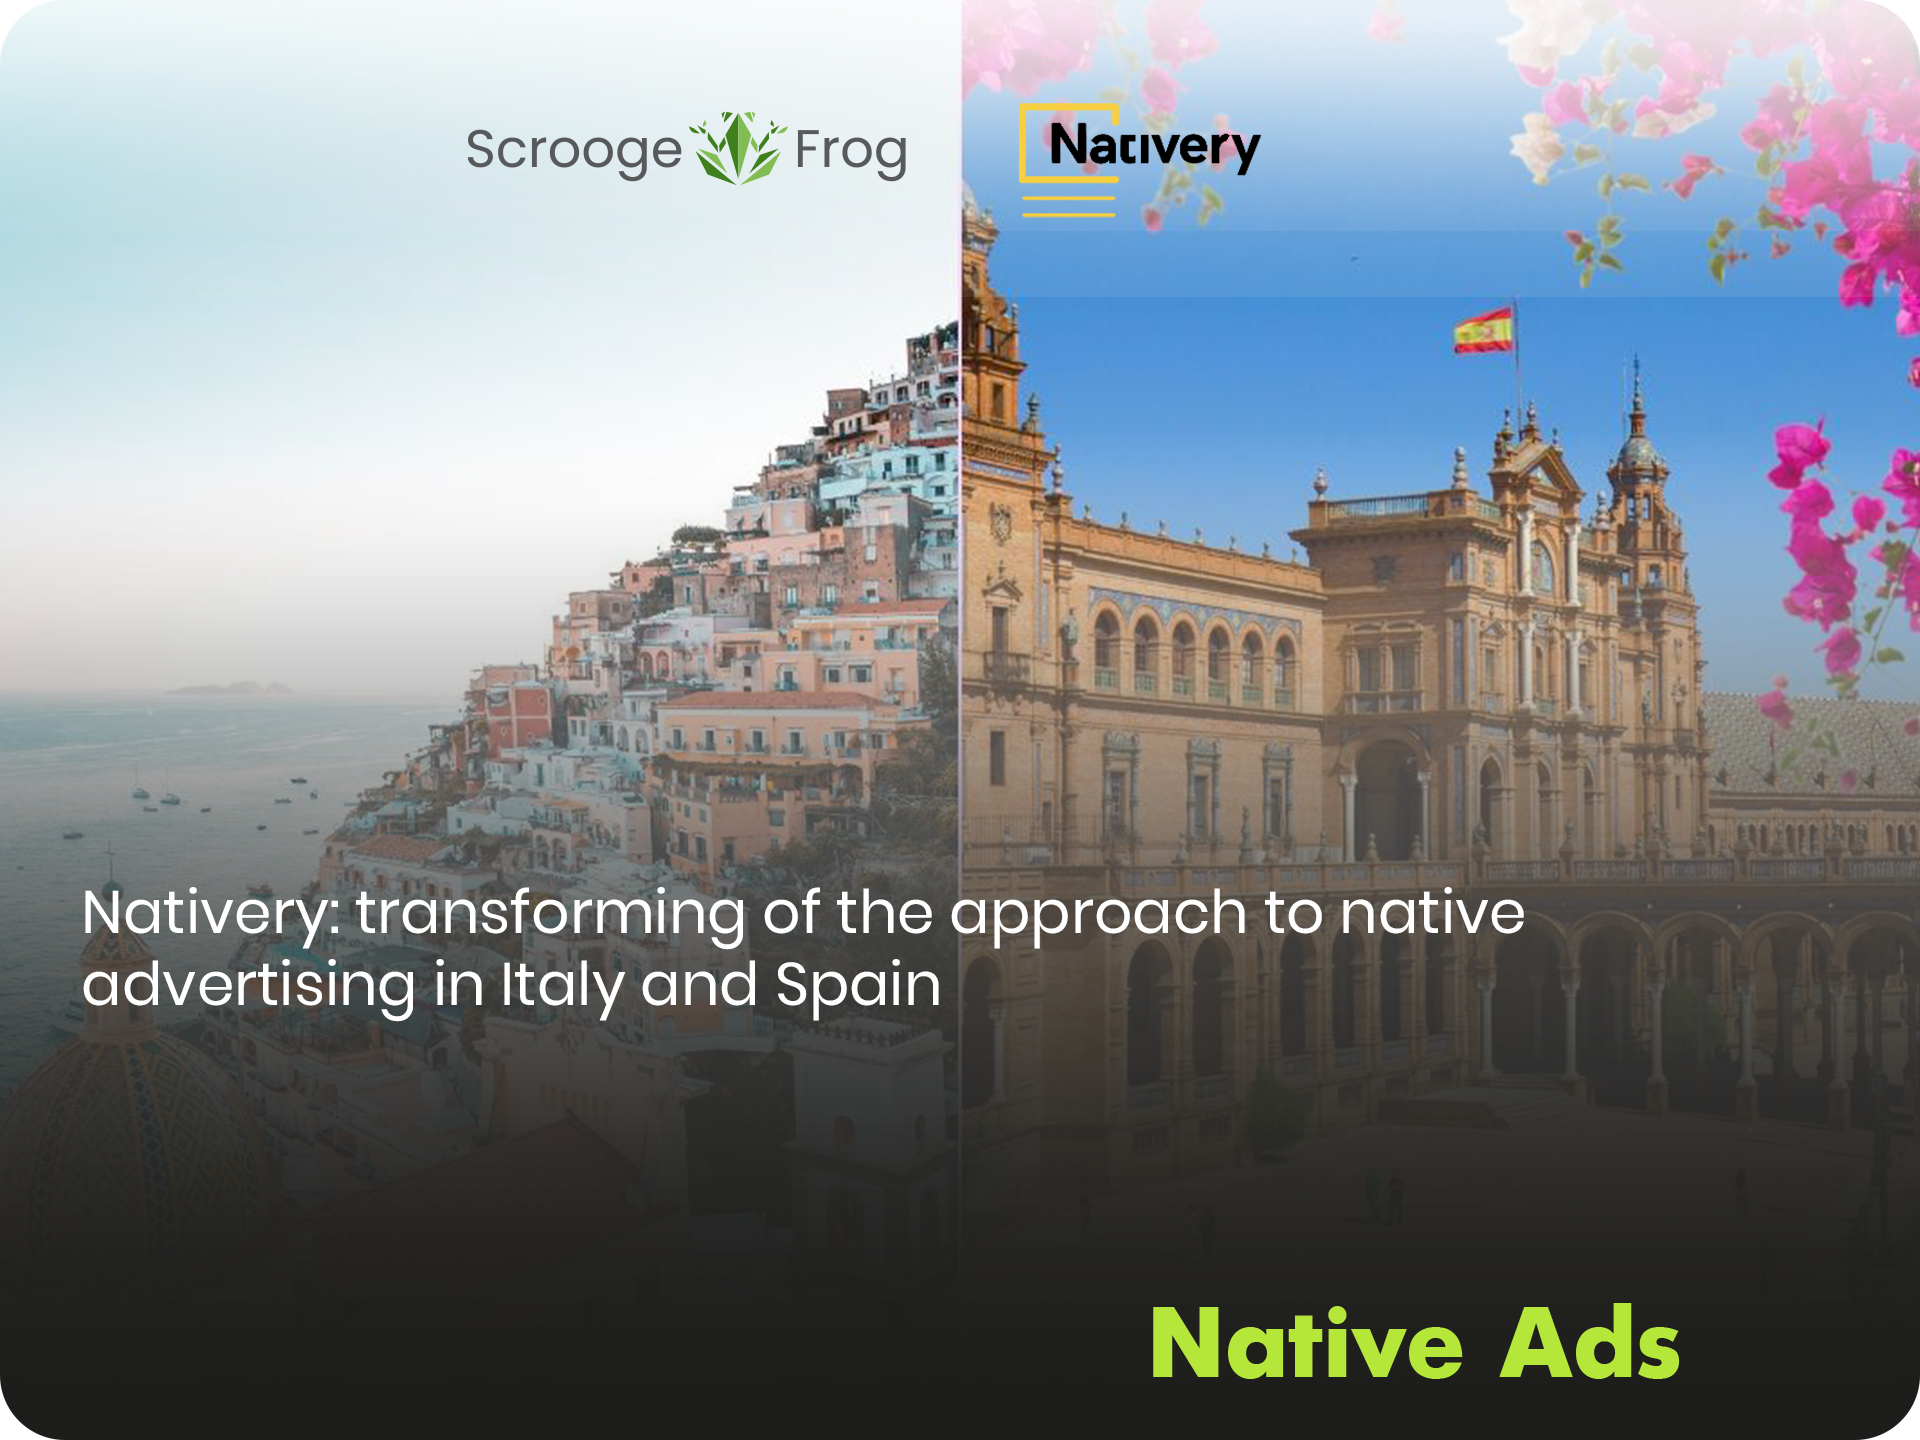 Nativery: transforming of the approach to native advertising in Italy and Spain